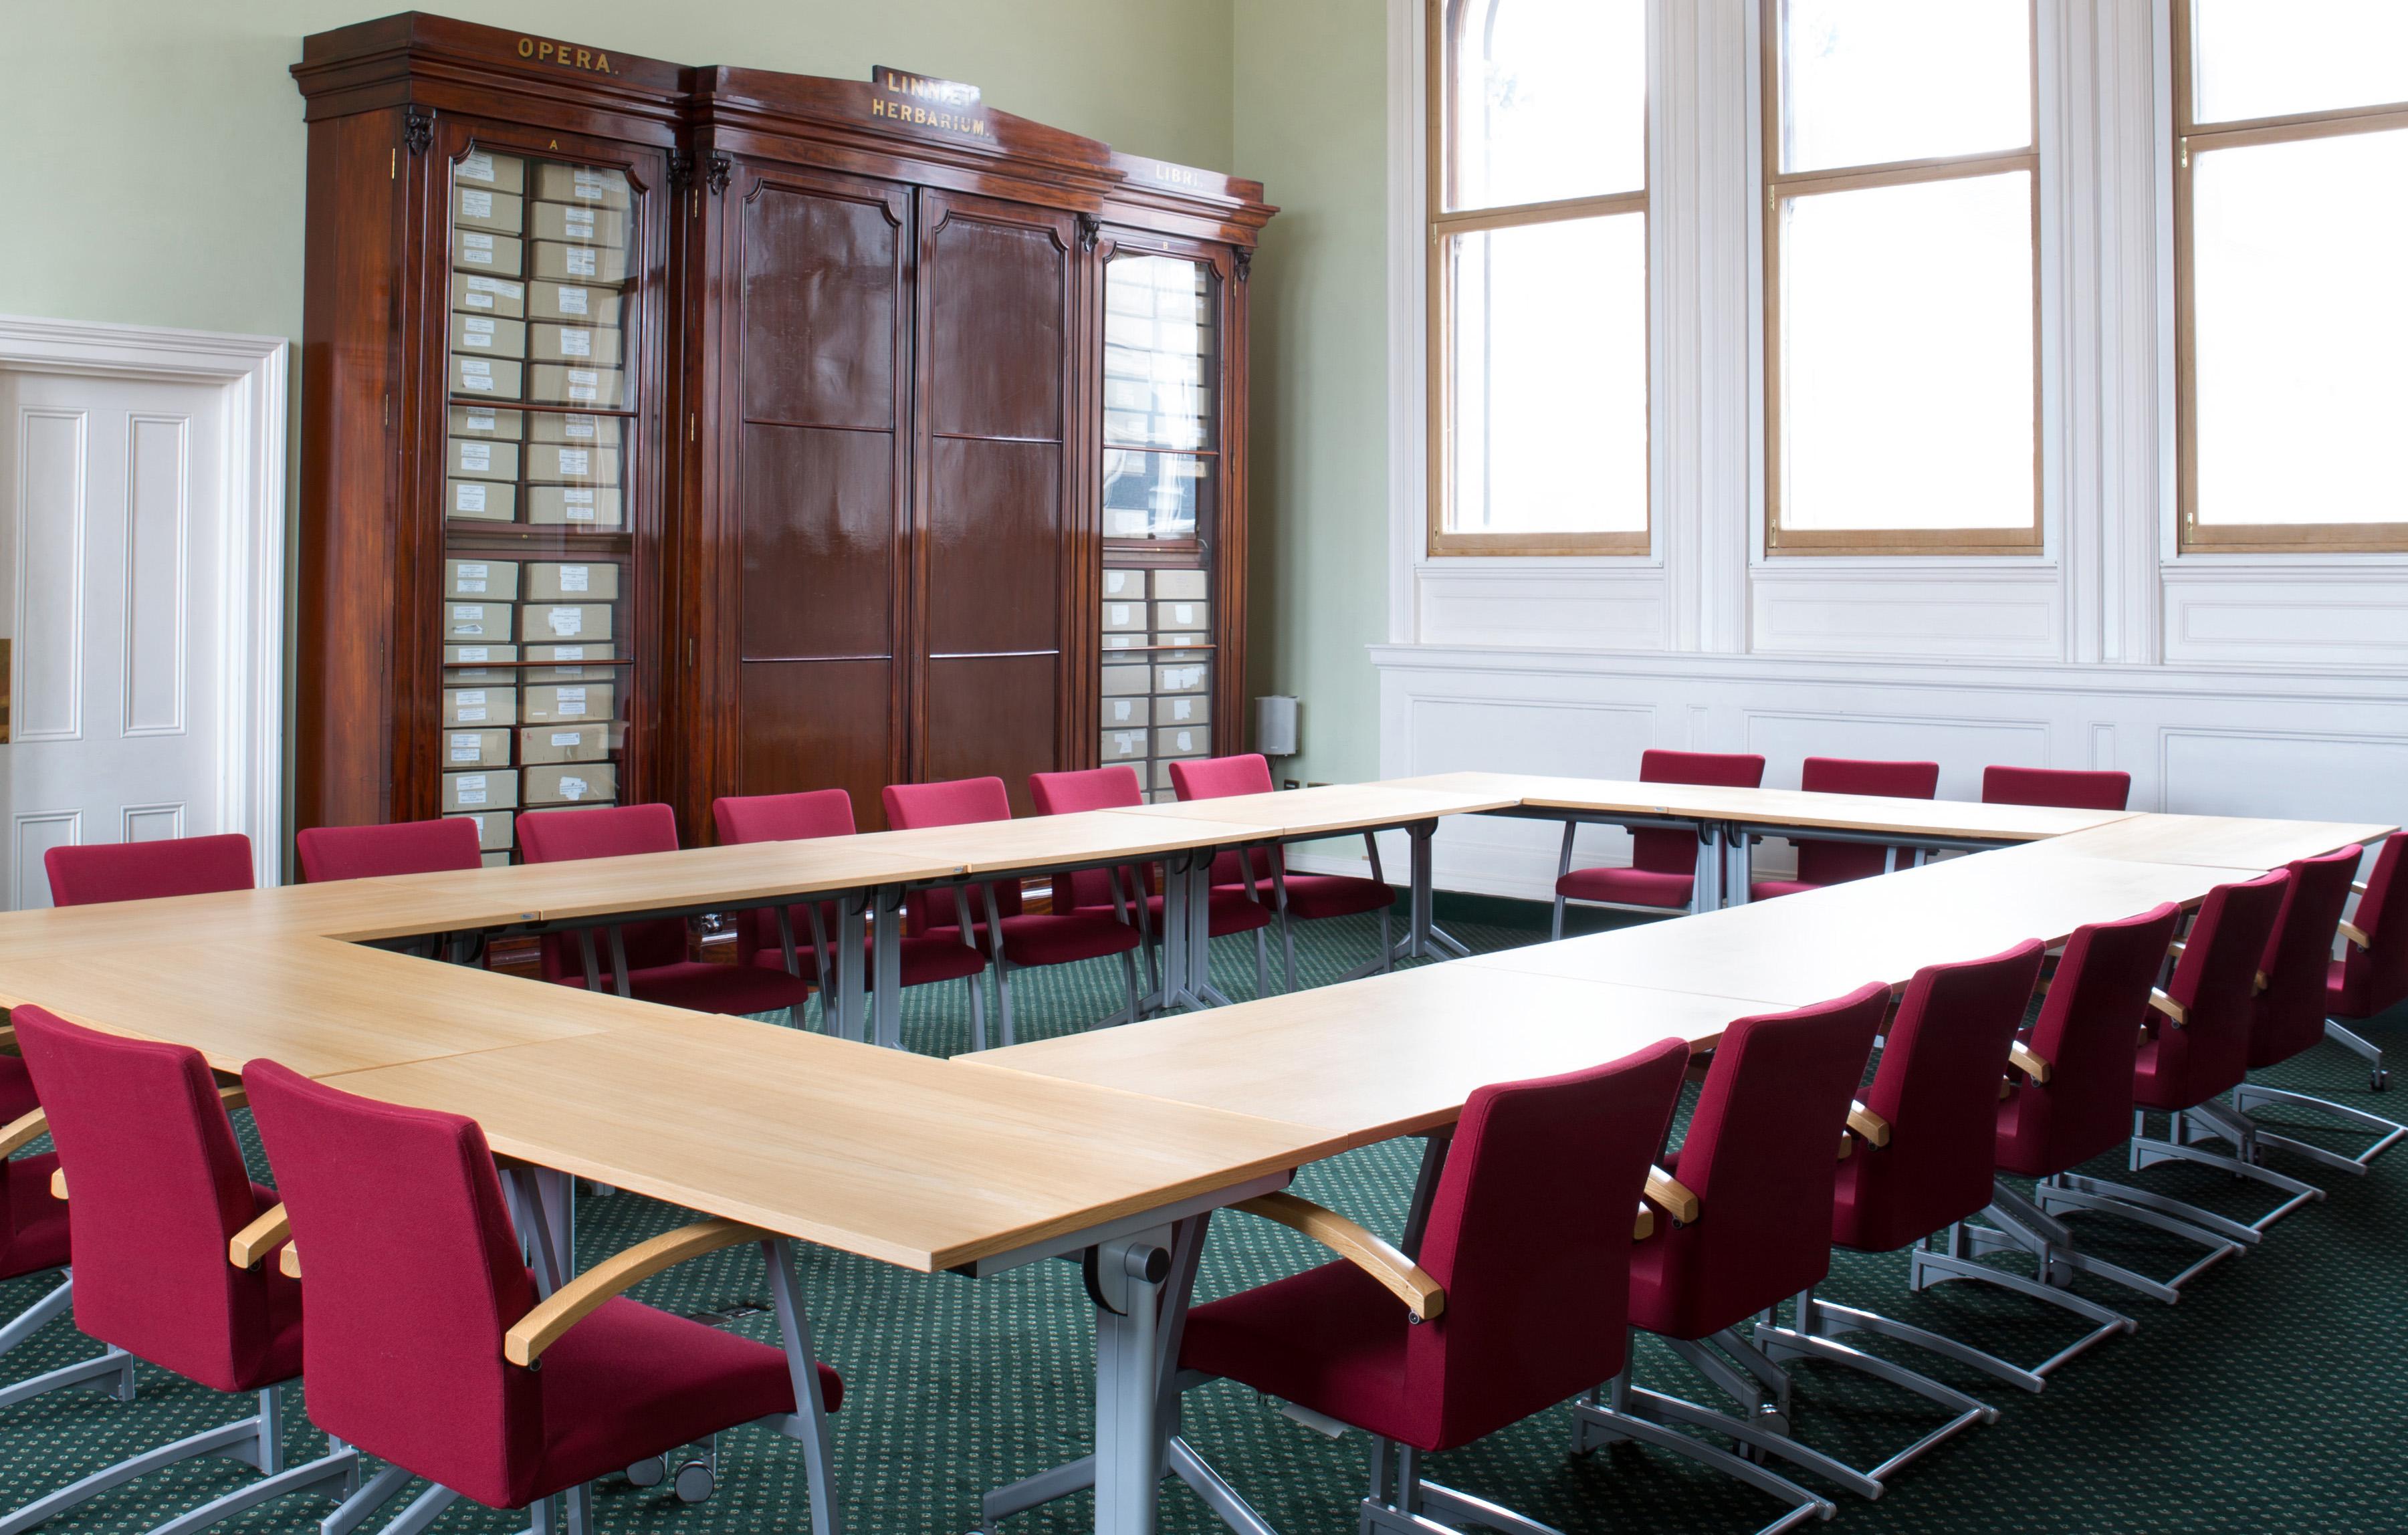 The Linnean Society of London, Meeting Room
   photo #1